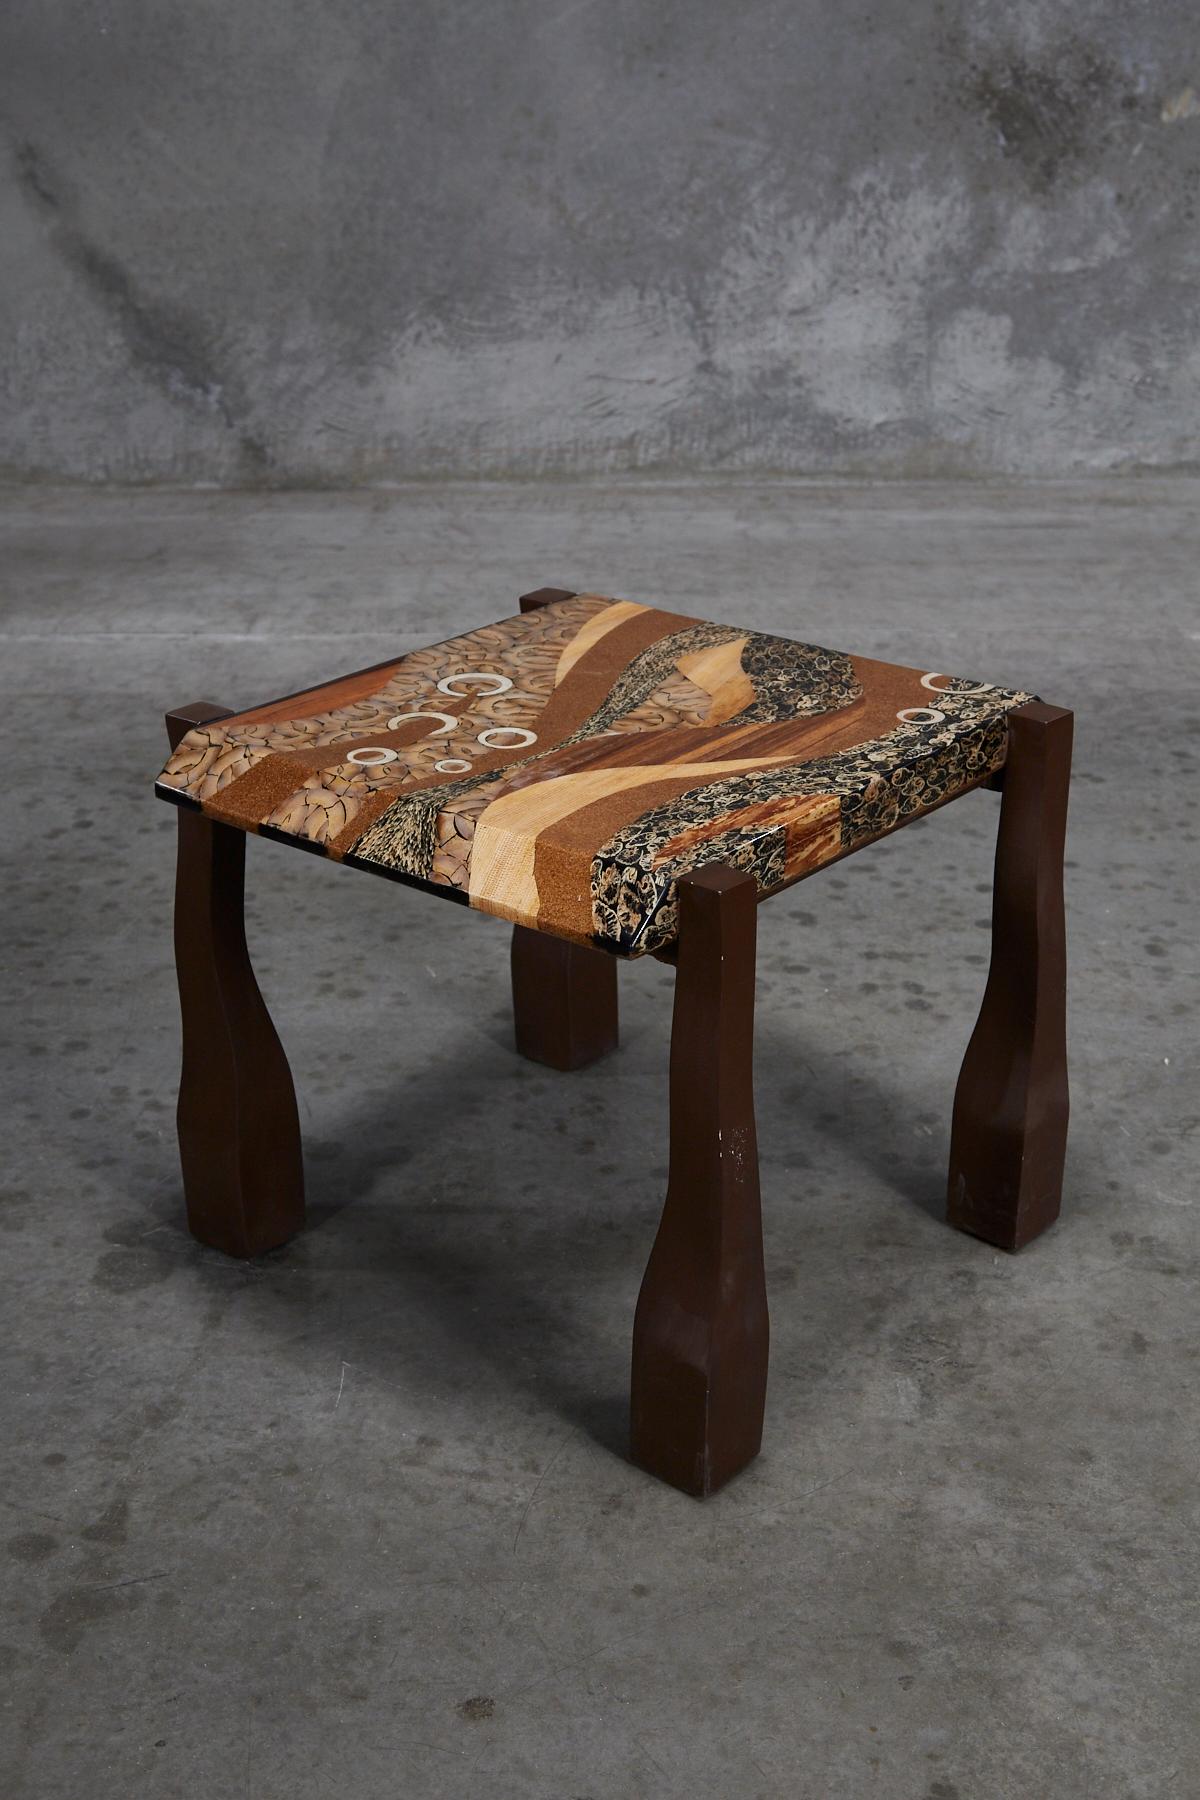 Square side table with exotic inlay over a fiberglass body. Multiple types of materials including wild pearl vine, cotton husk, light and dark banana bark, bamboo circles, and honeycomb cane leaf into a freeform abstract pattern across the surface